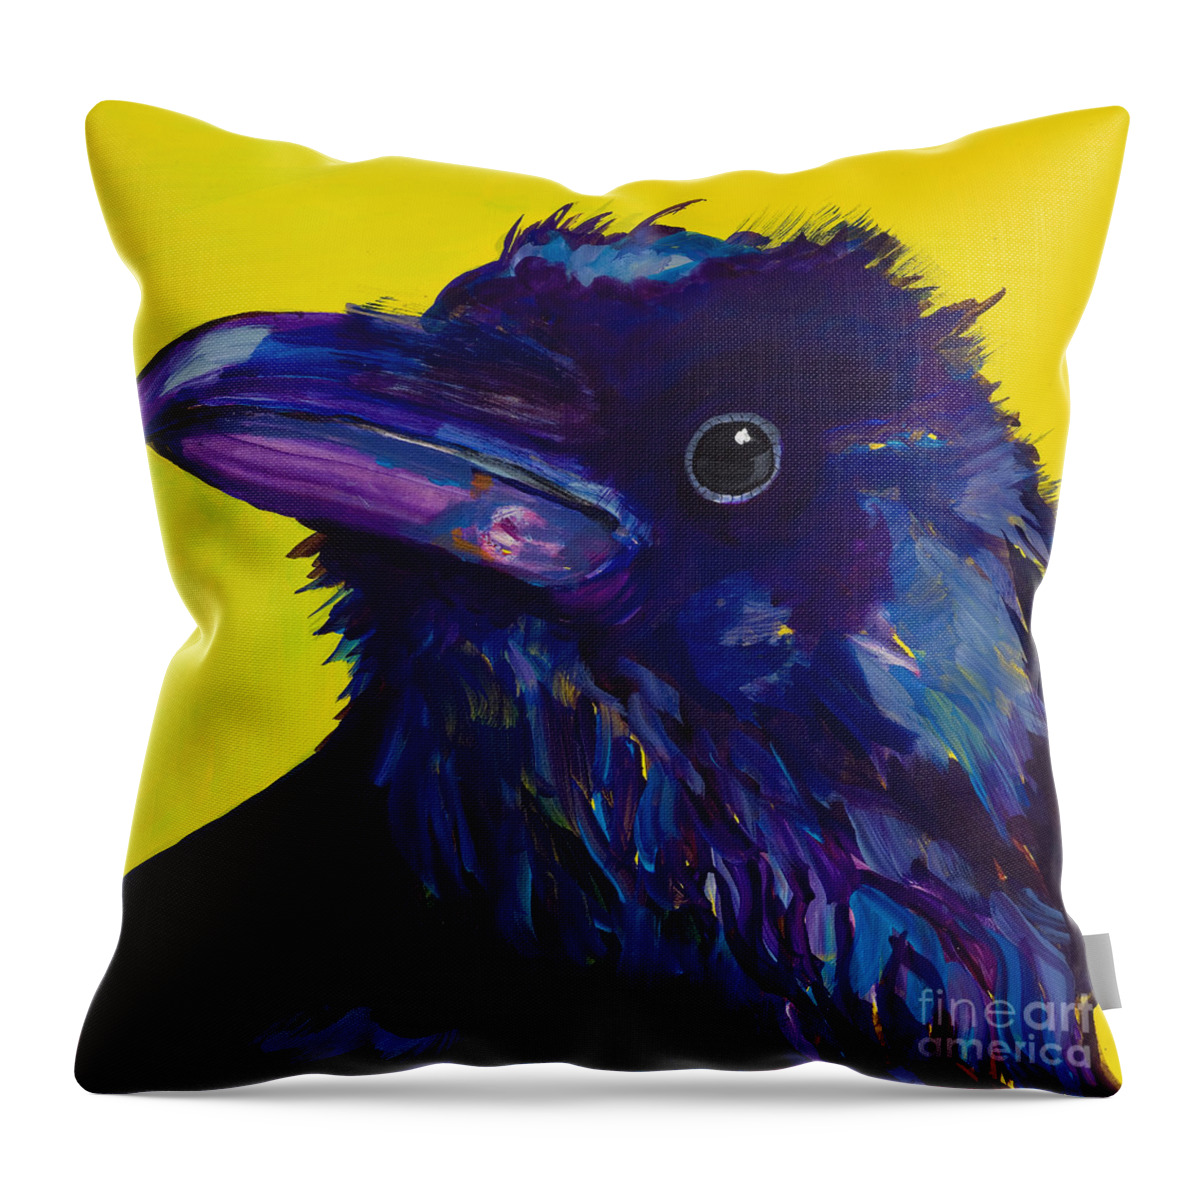 Bird Throw Pillow featuring the painting Corvus by Pat Saunders-White